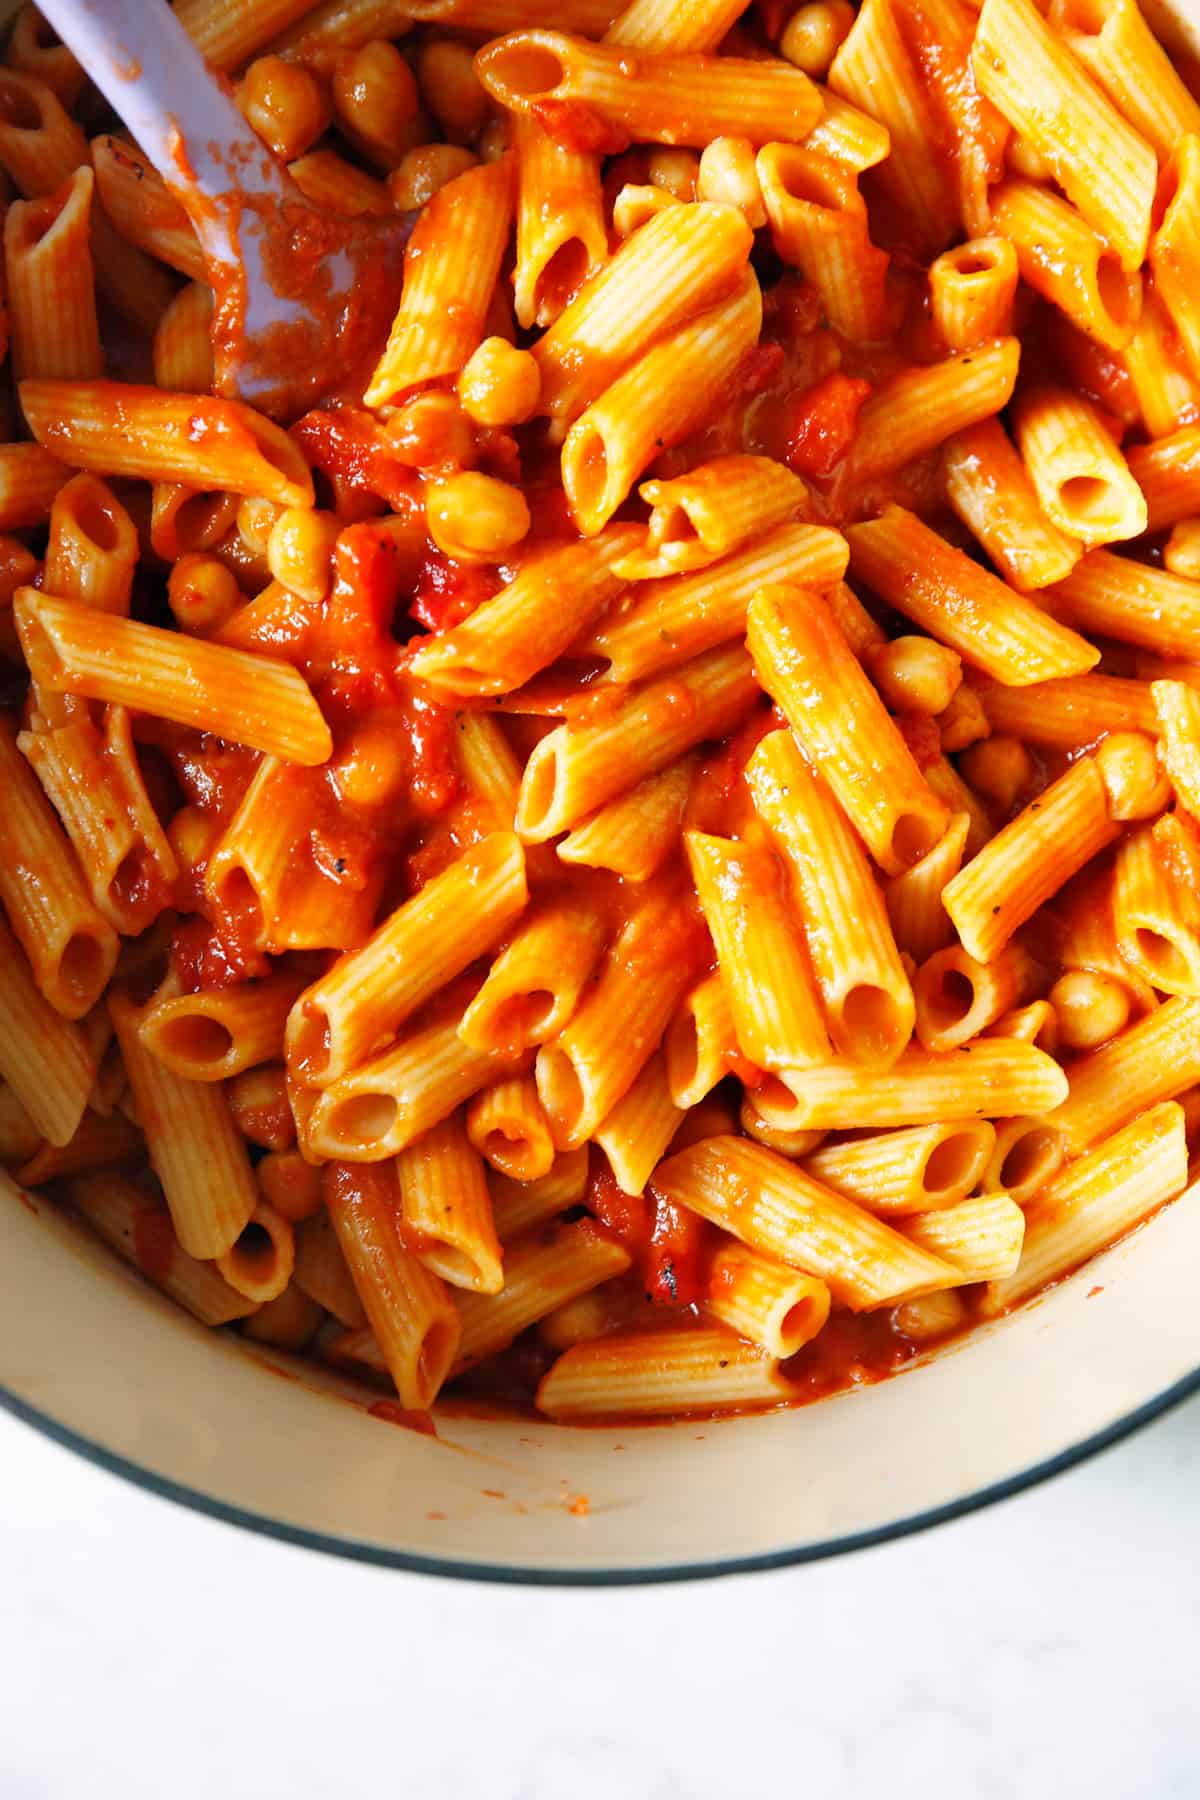 Pasta with roasted red peppers in a pot